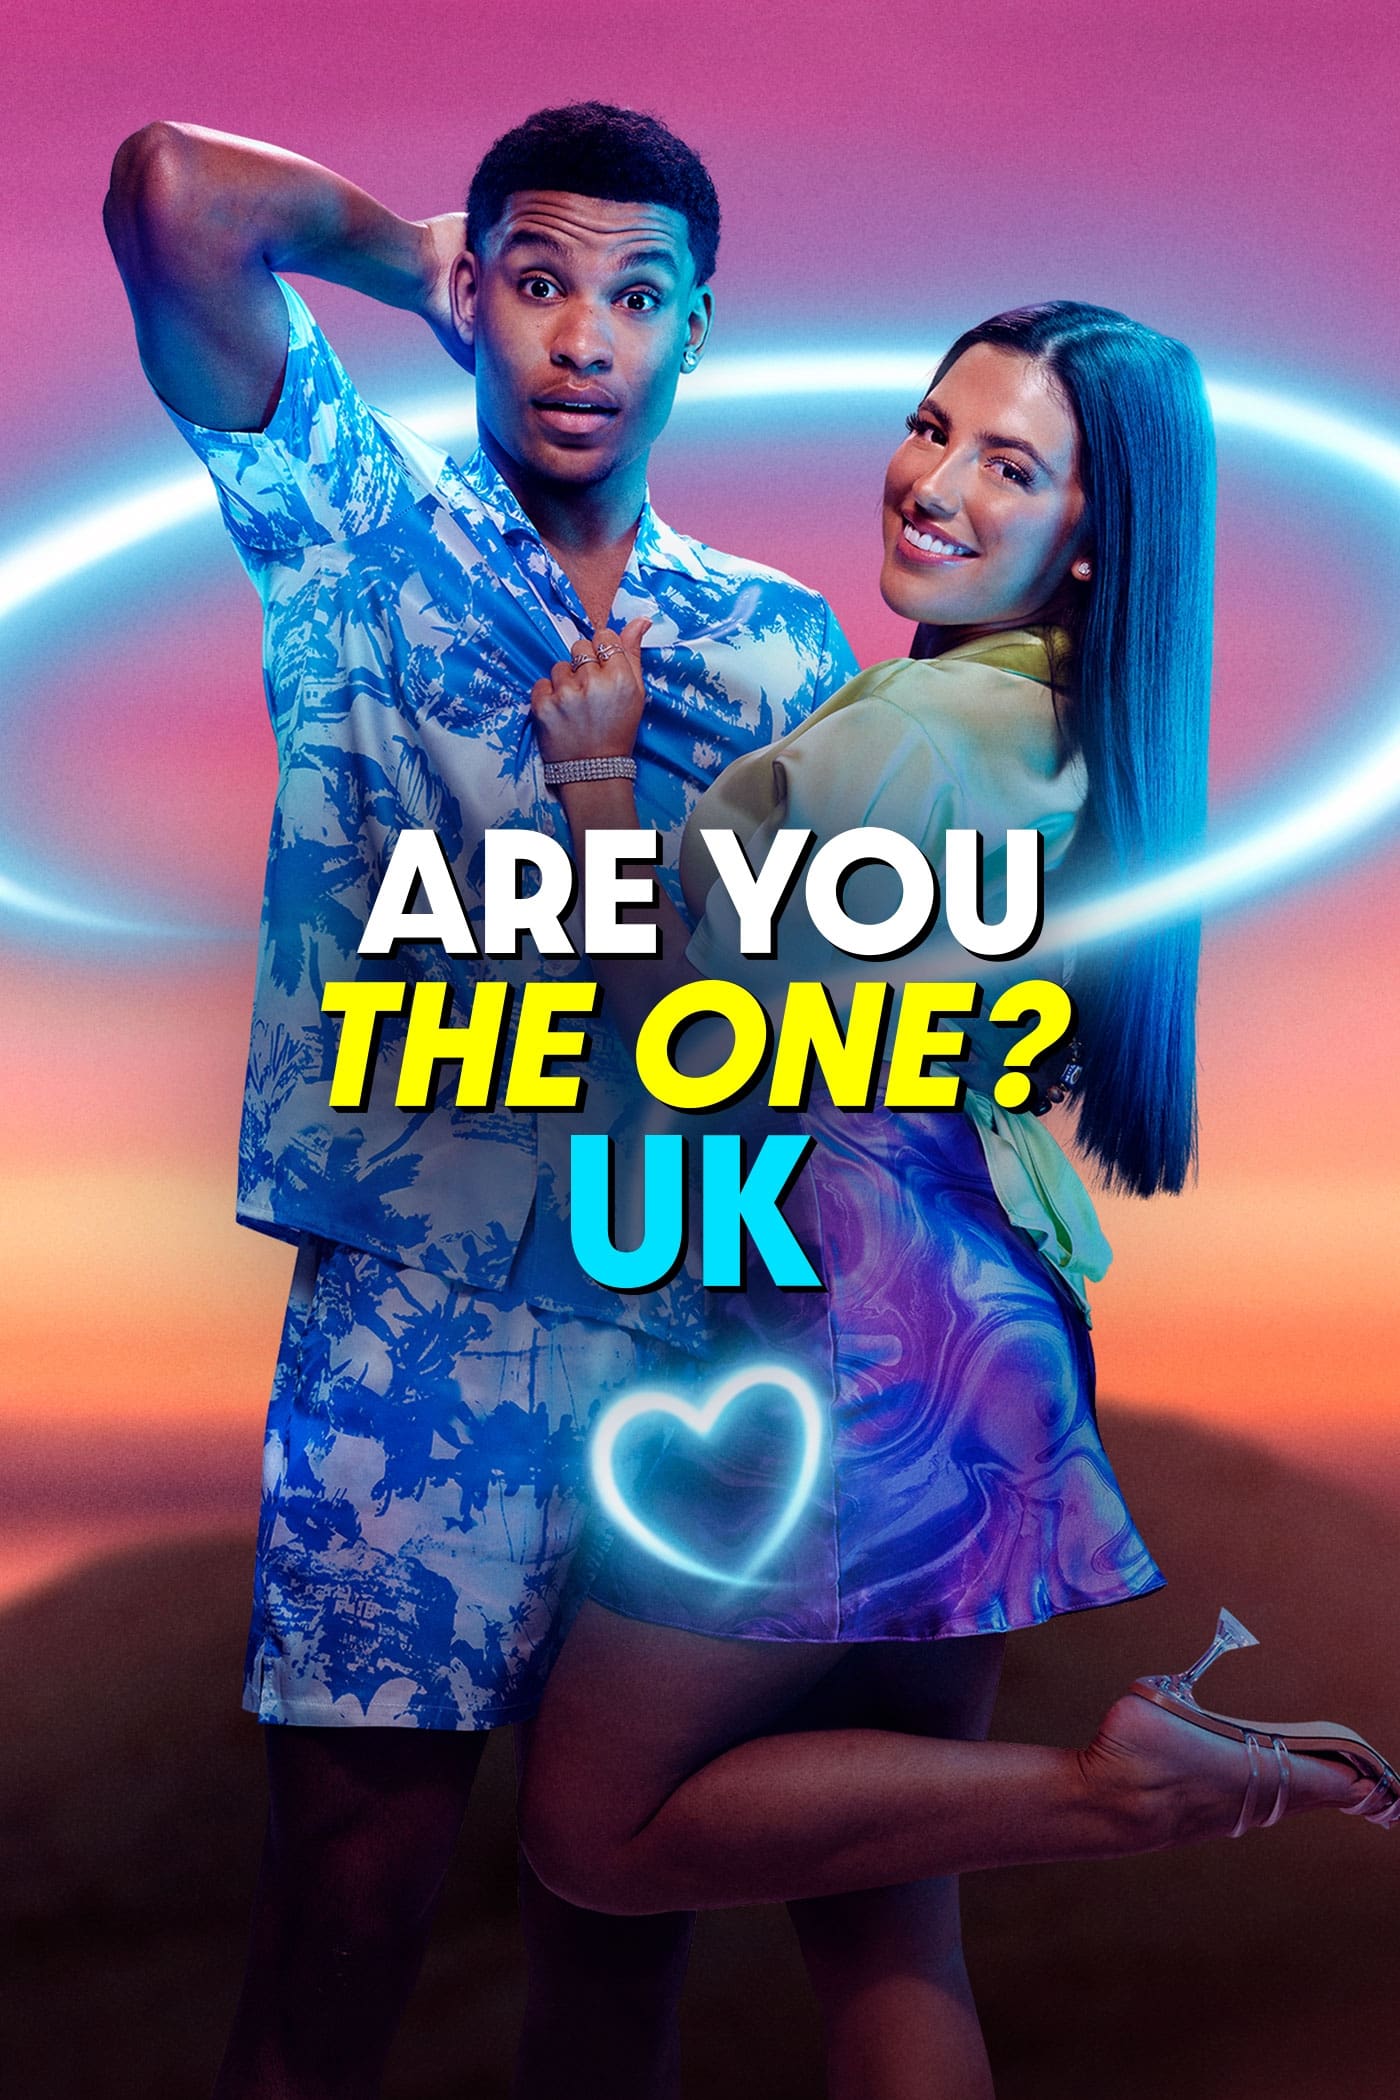 Are You The One? UK TV Shows About Dating